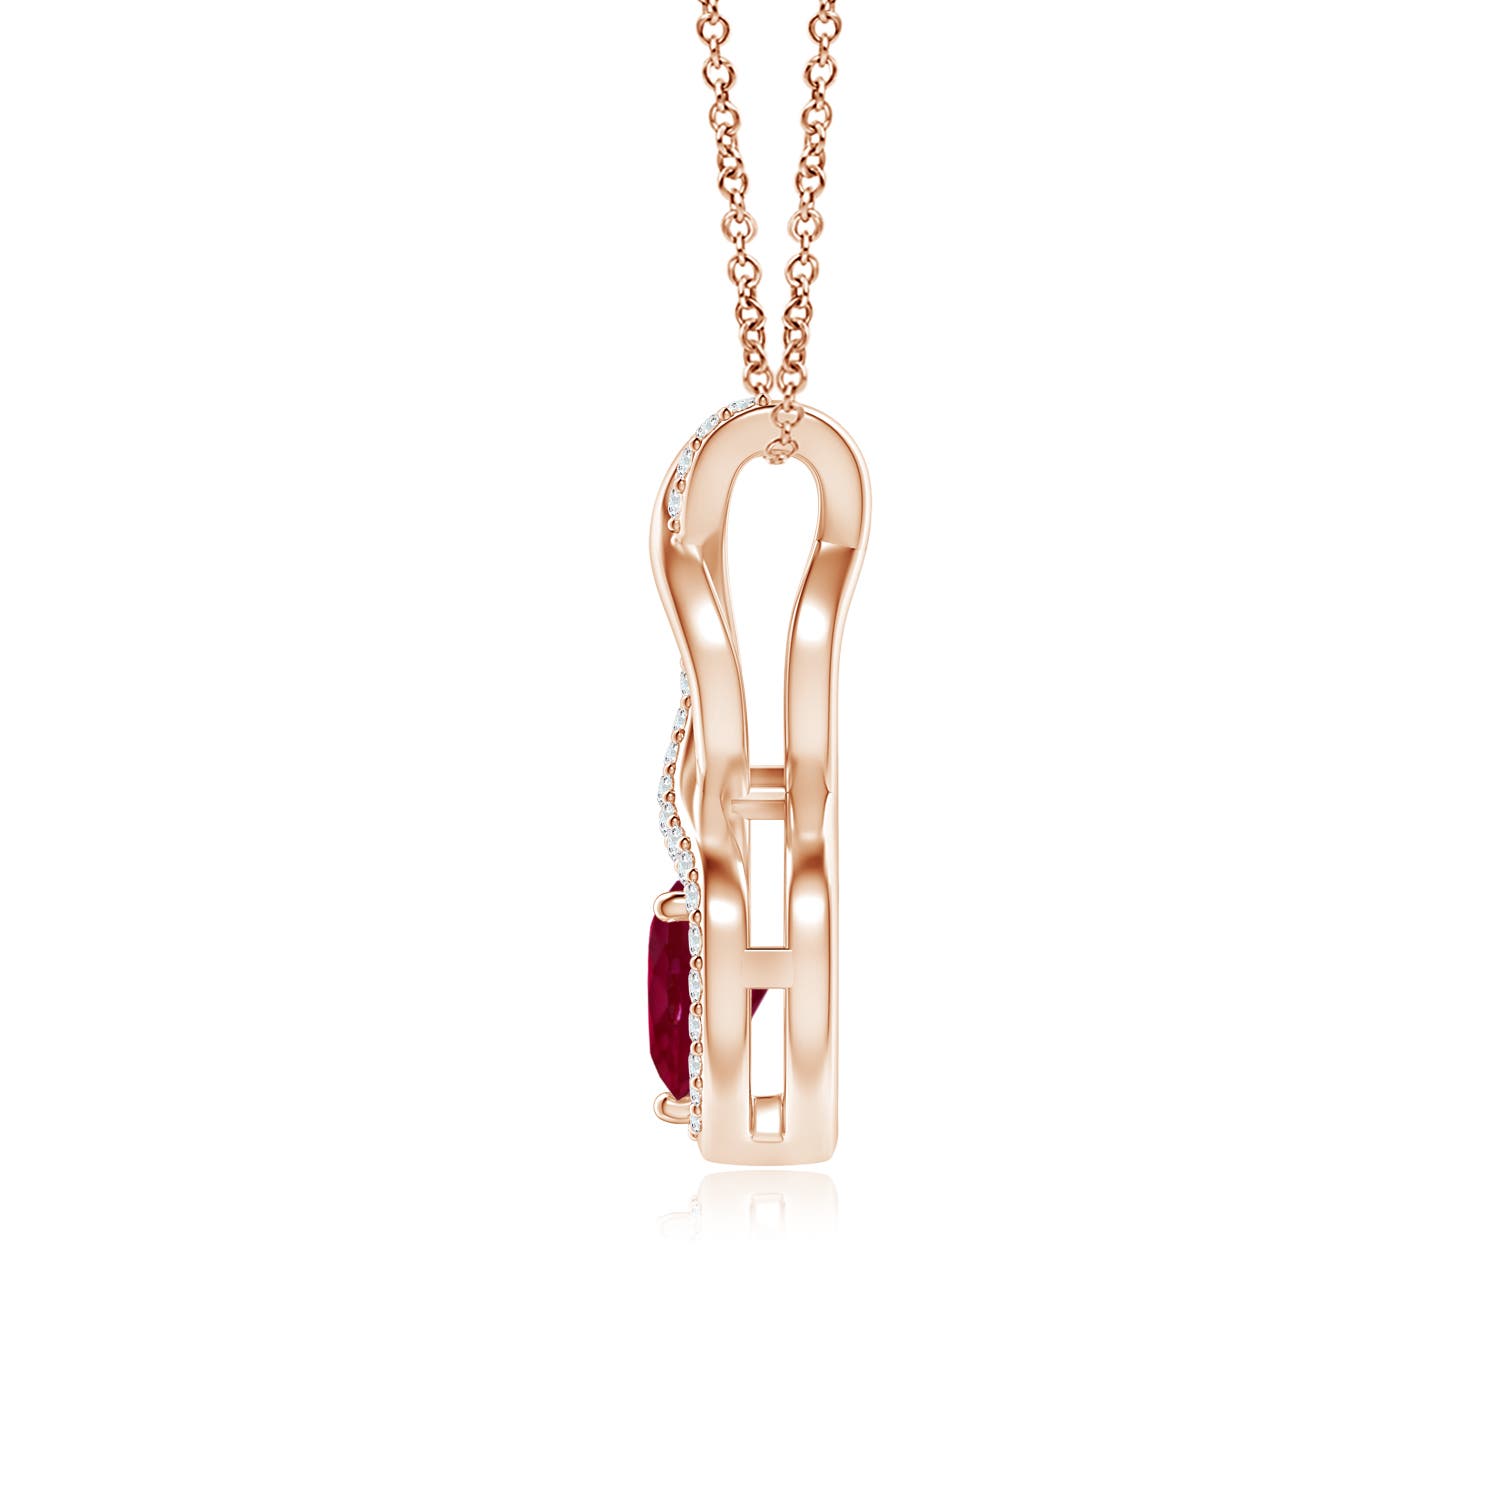 A - Ruby / 0.61 CT / 14 KT Rose Gold